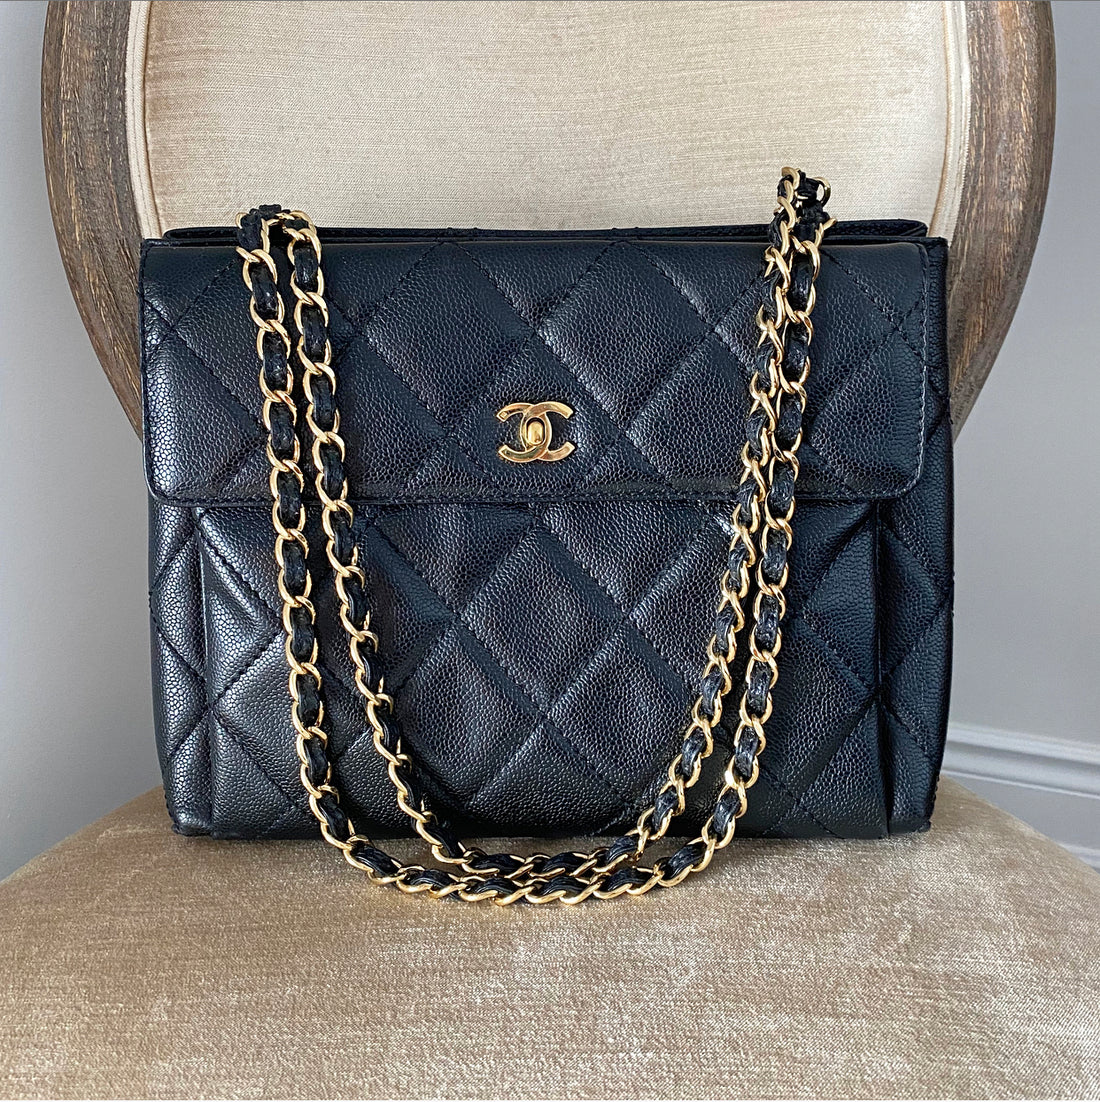 Chanel Vintage Caviar Leather Black Flap Tote Bag with Gold Chain Hand – I  MISS YOU VINTAGE